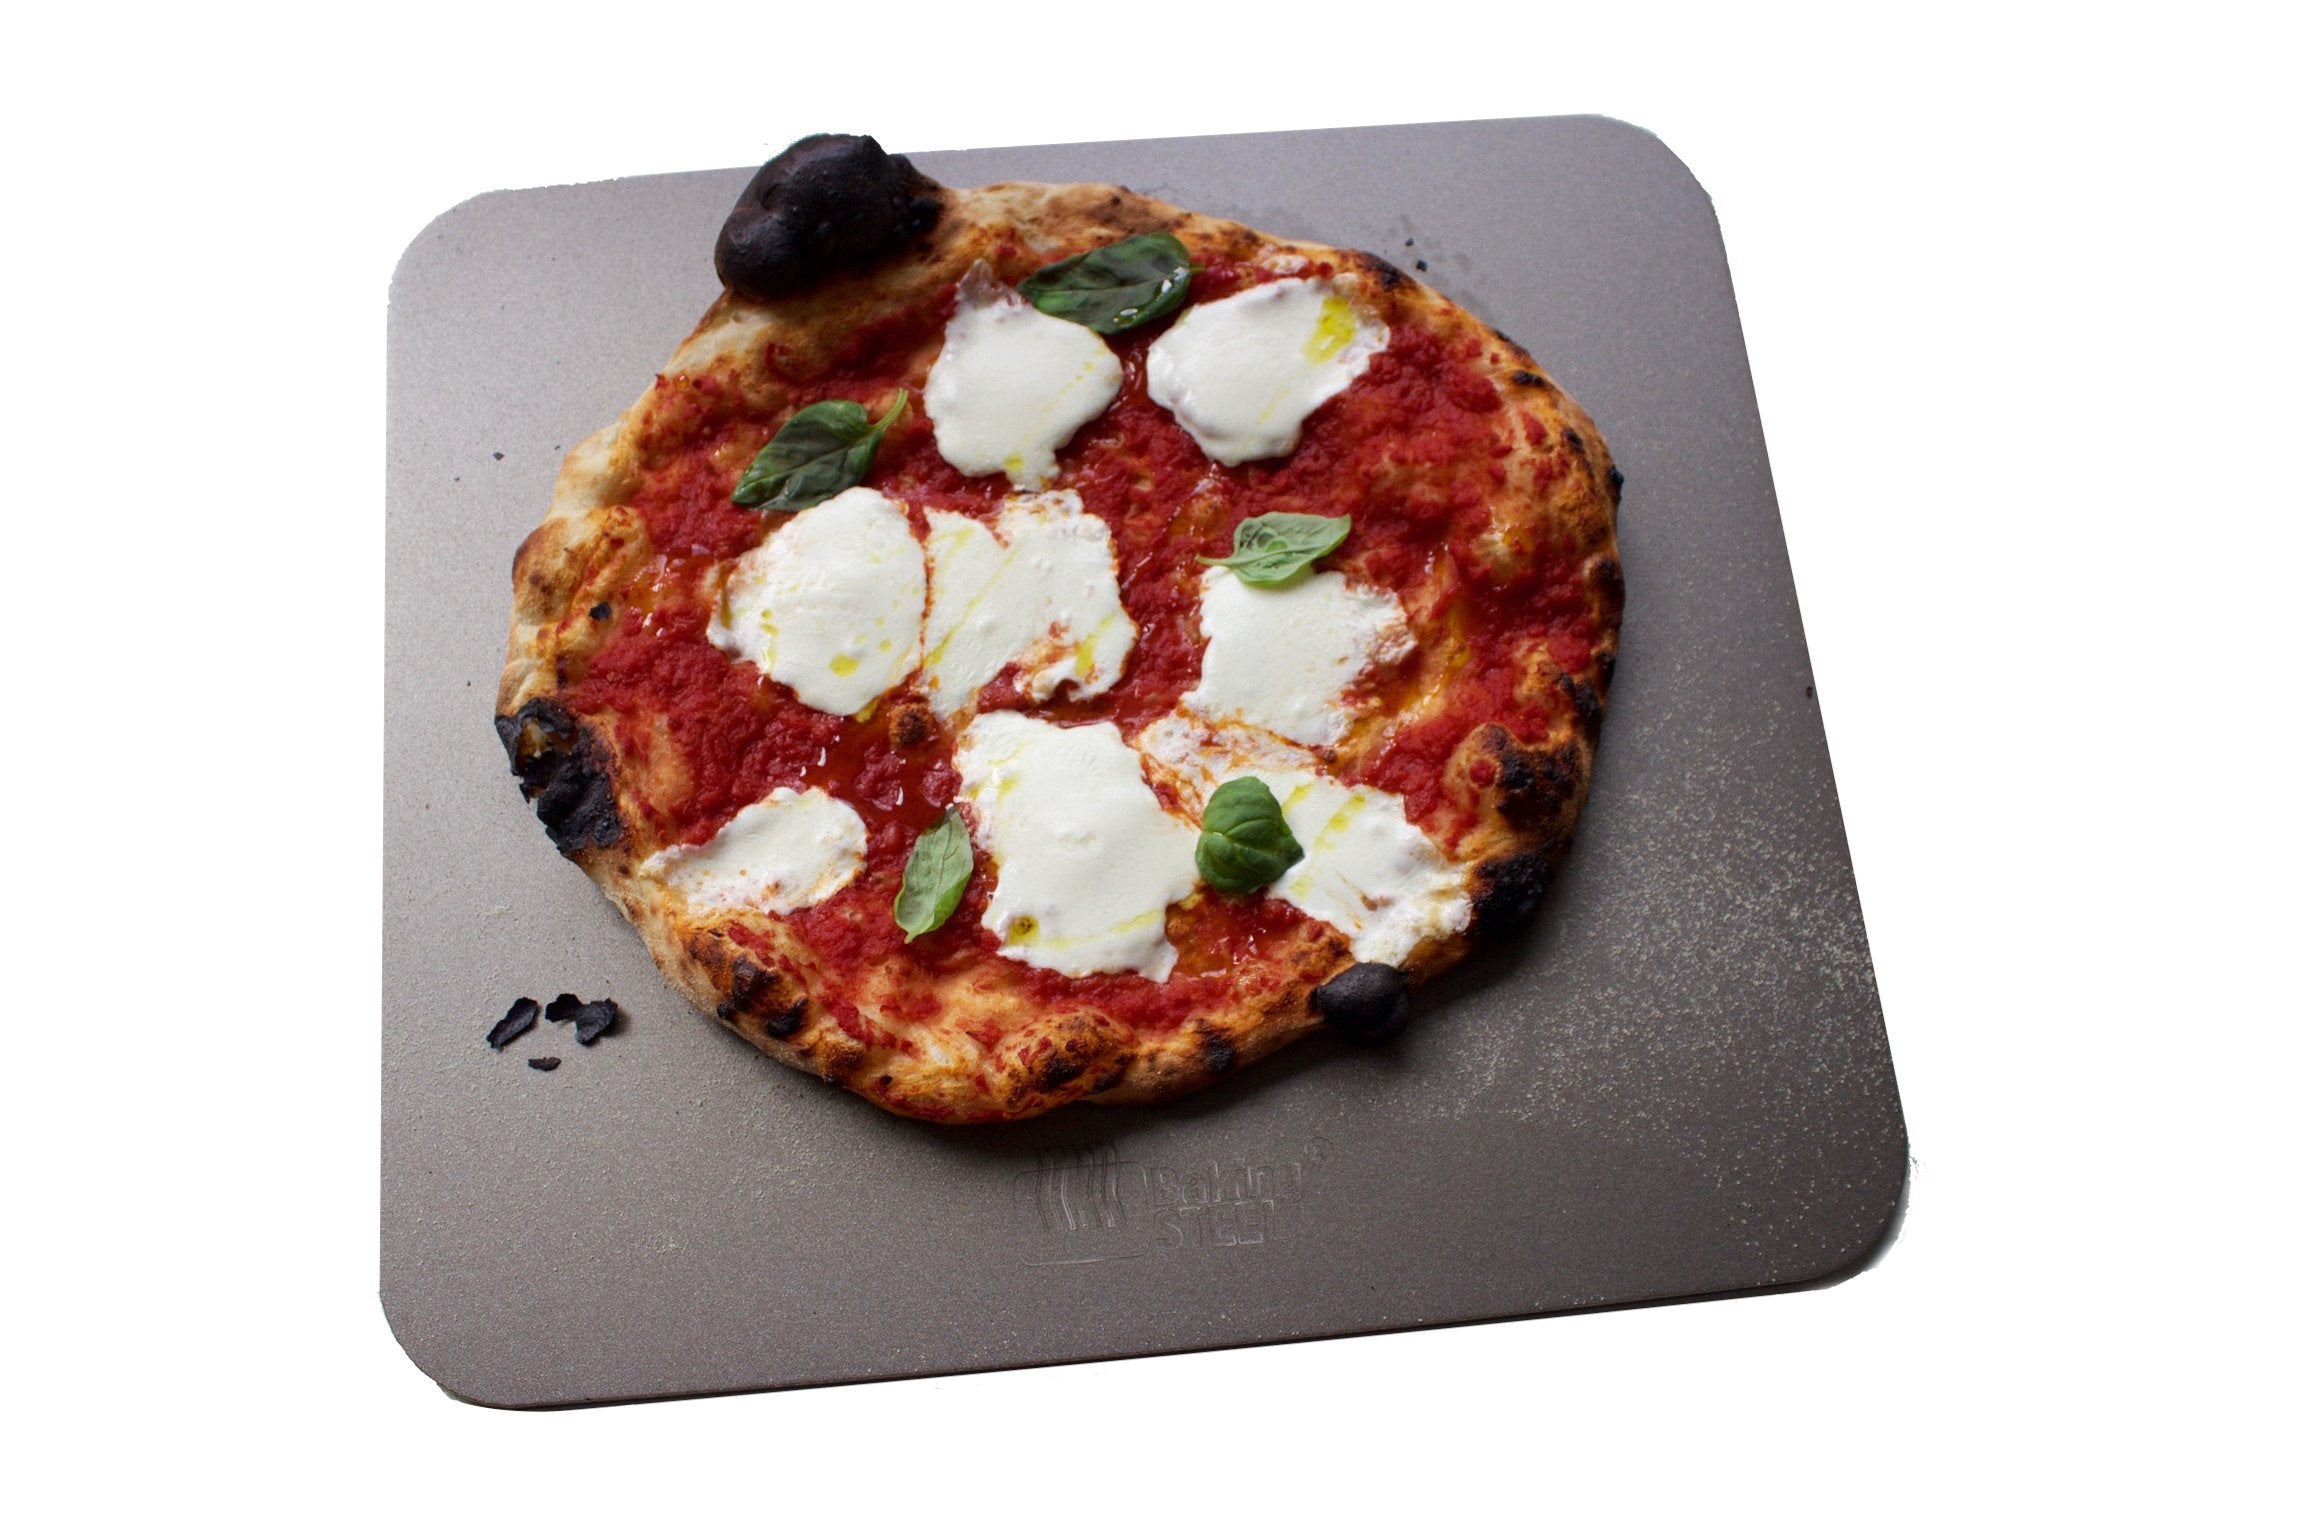 Modular Baking Steel Pizza Stone for Oven and Grill - A Design Offering  Easier Cleaning, Handling and Storage, Consistent Cooking Temperatures,  Expansions with a Second Steel, and is Made in the USA 